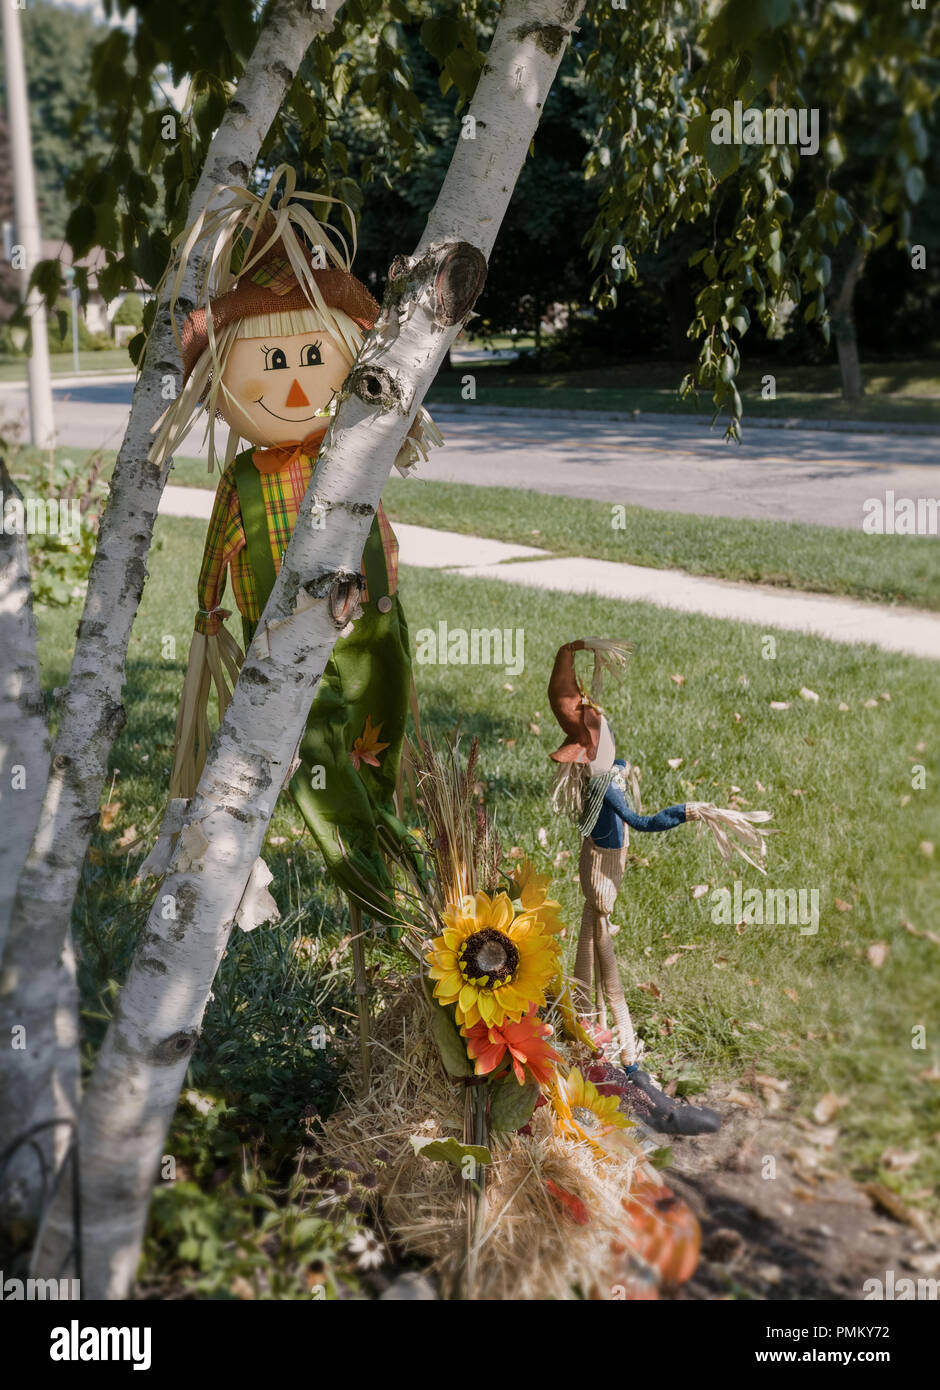 Halloween, outside decorations, straw man, scarecrows. Stock Photo